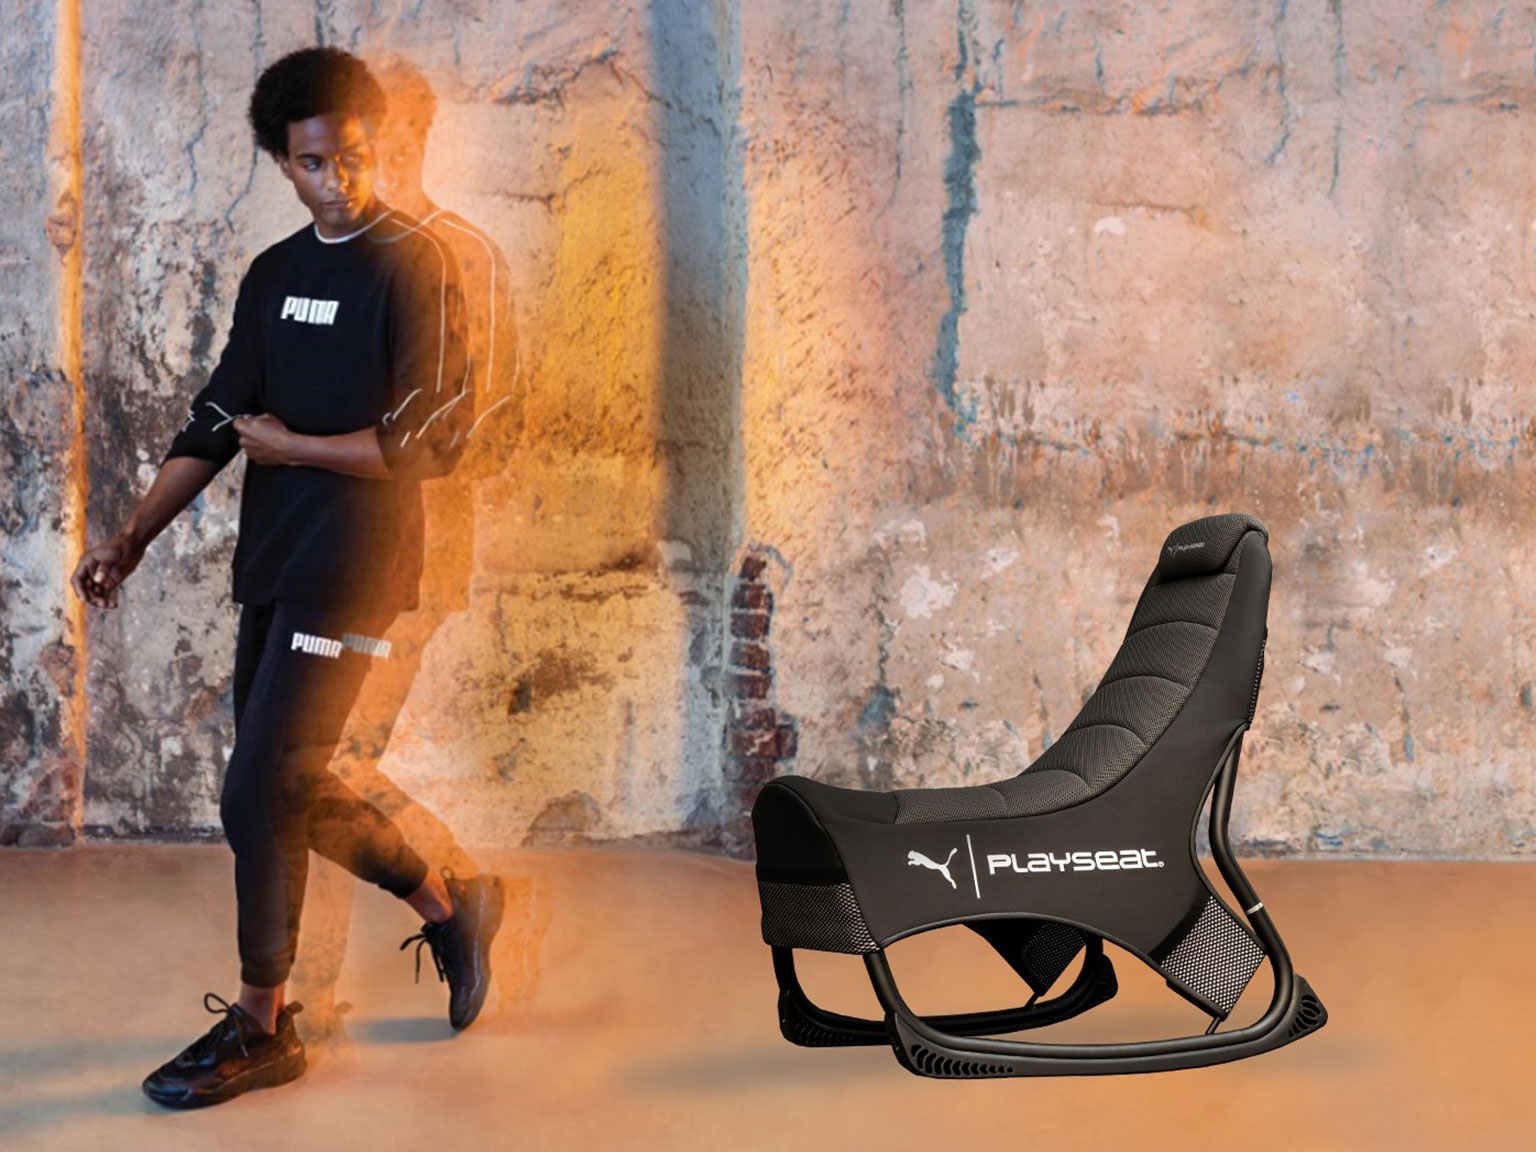 PUMA's and Playseat's Gaming Seat